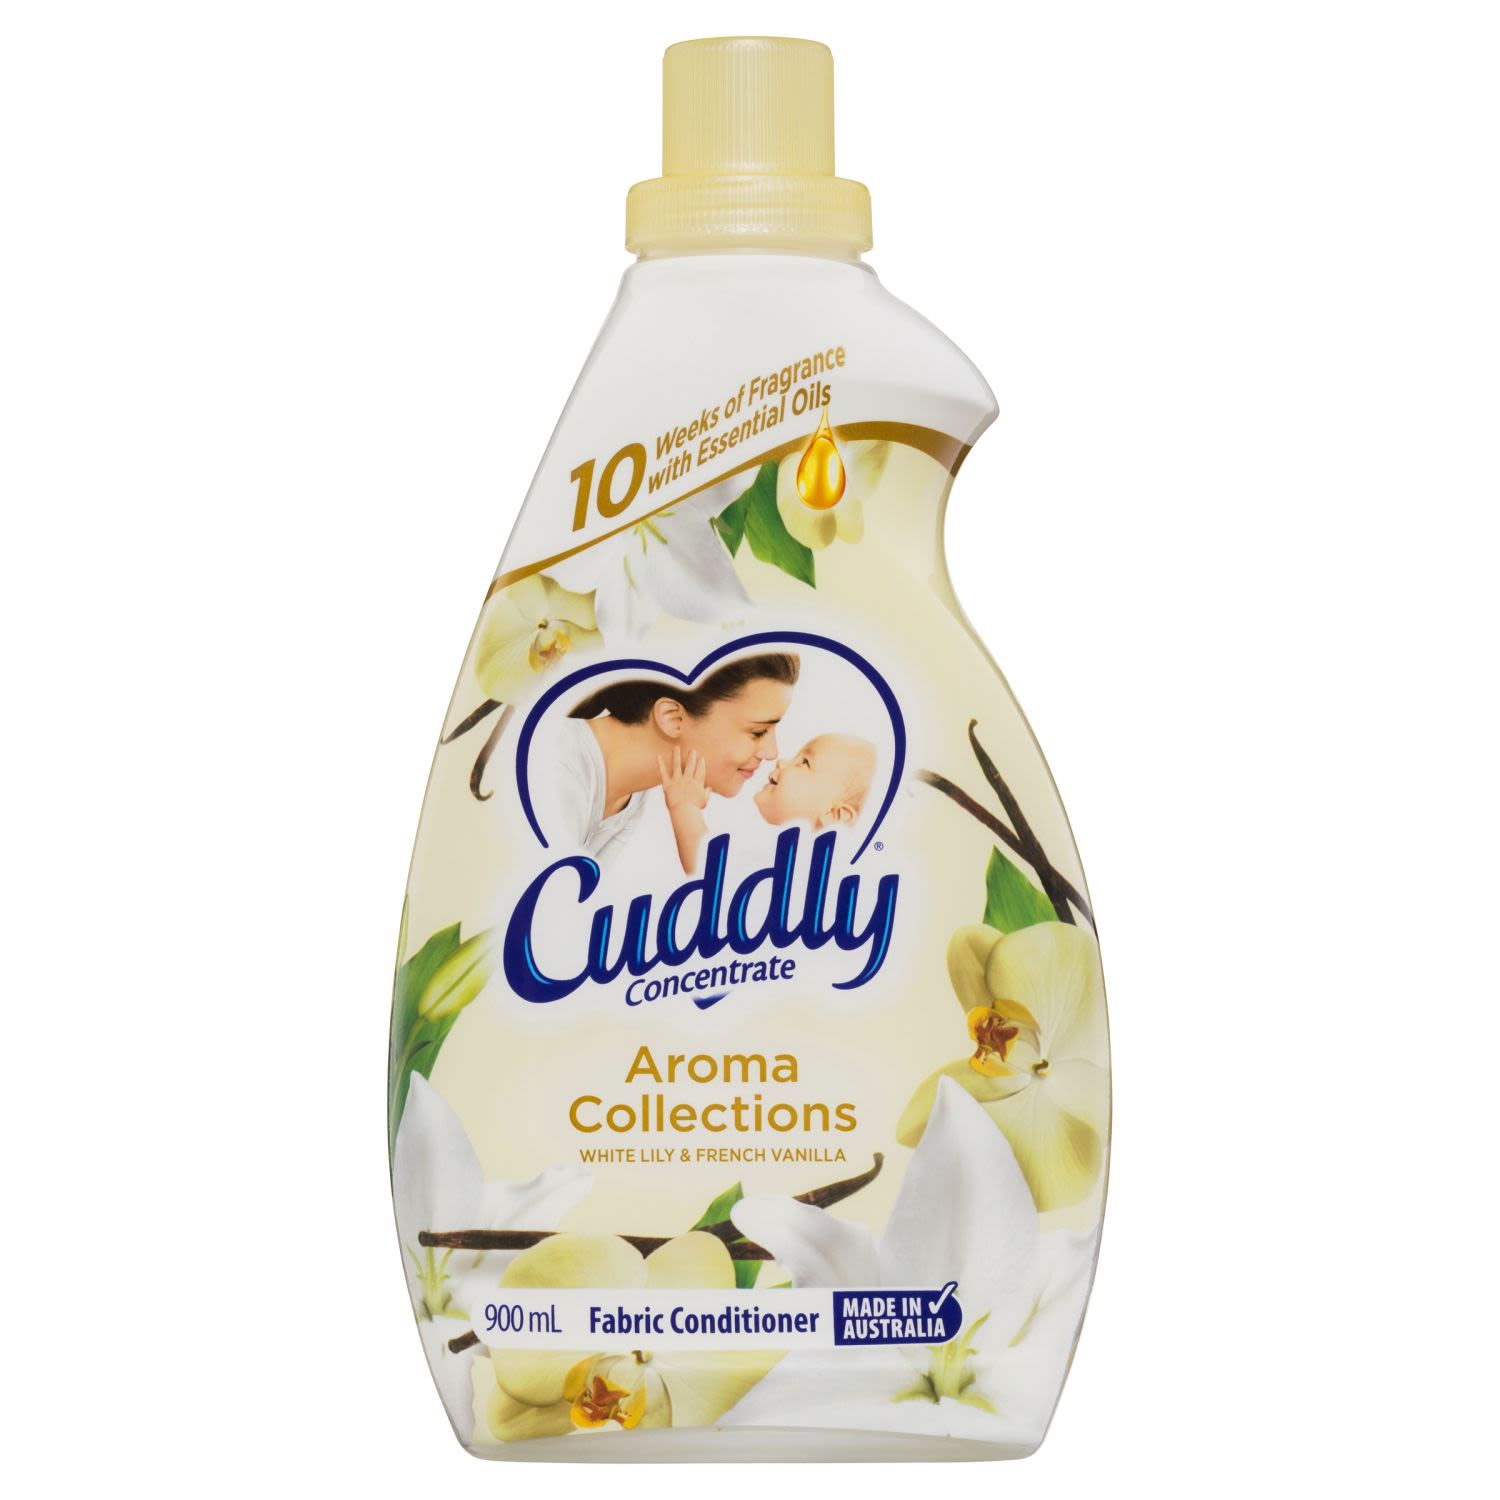 Cuddly Aroma Collections Concentrate Fabric Softener Conditioner White Lily & French Vanilla, 900 Millilitre